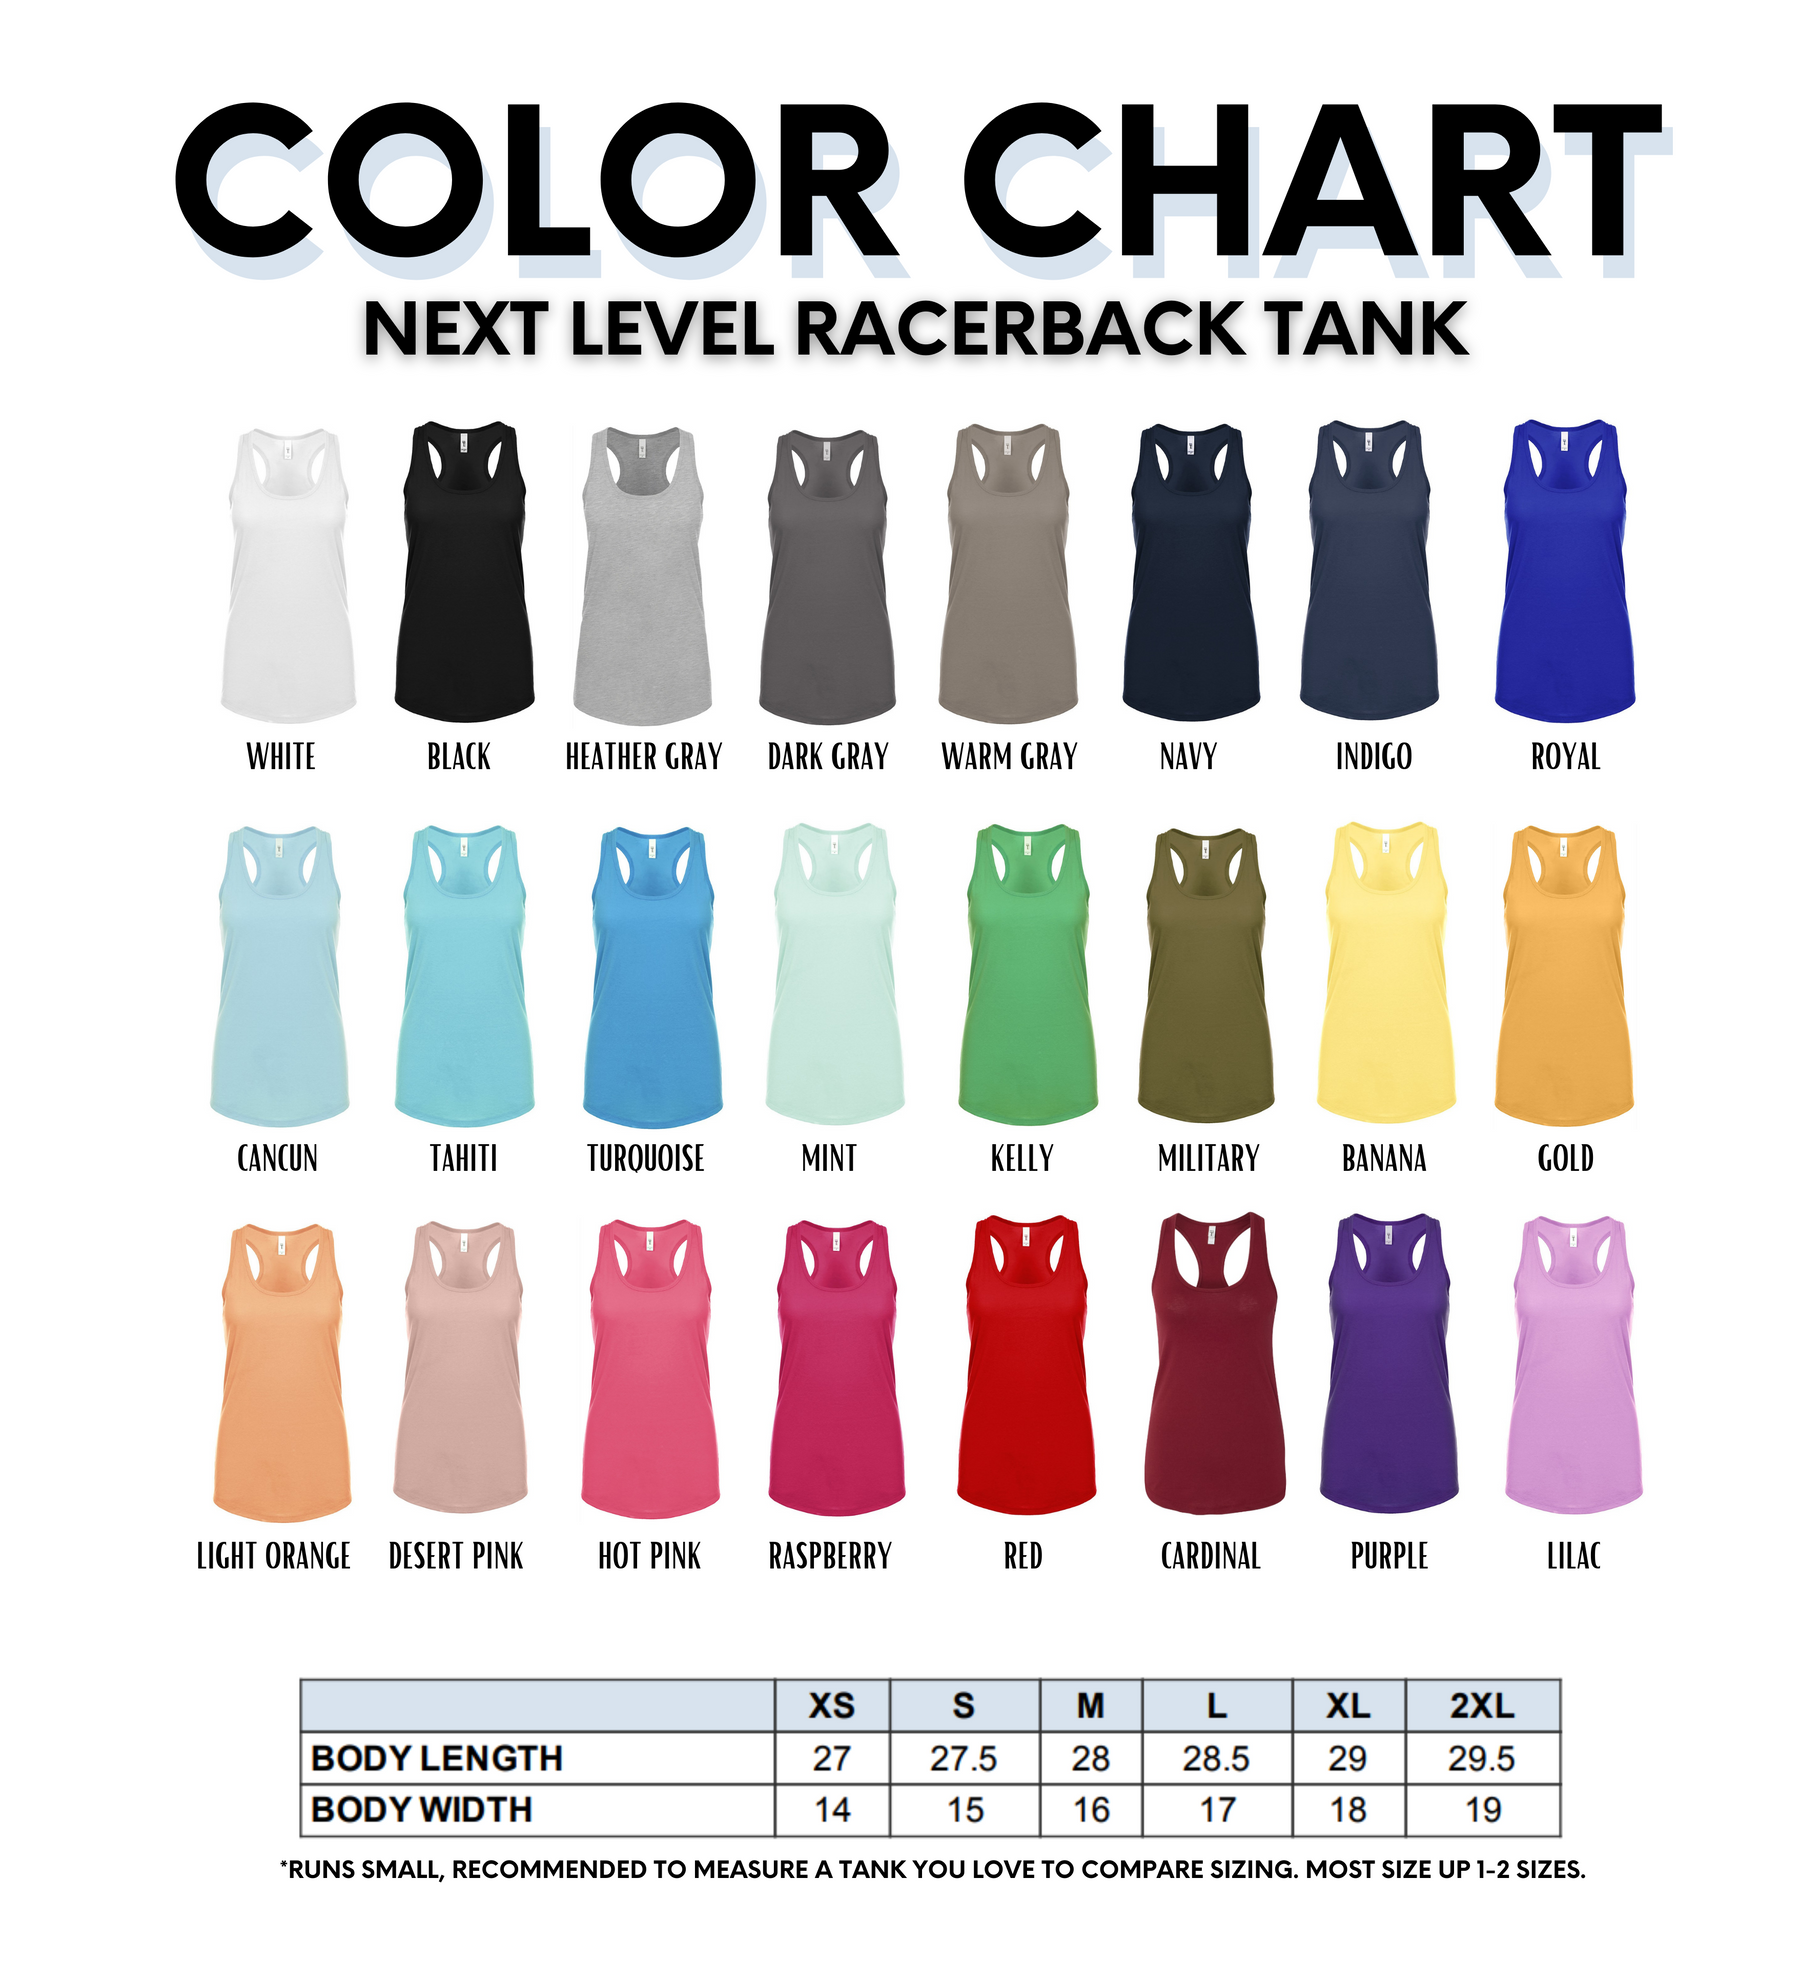 the color chart for a women's racer tank